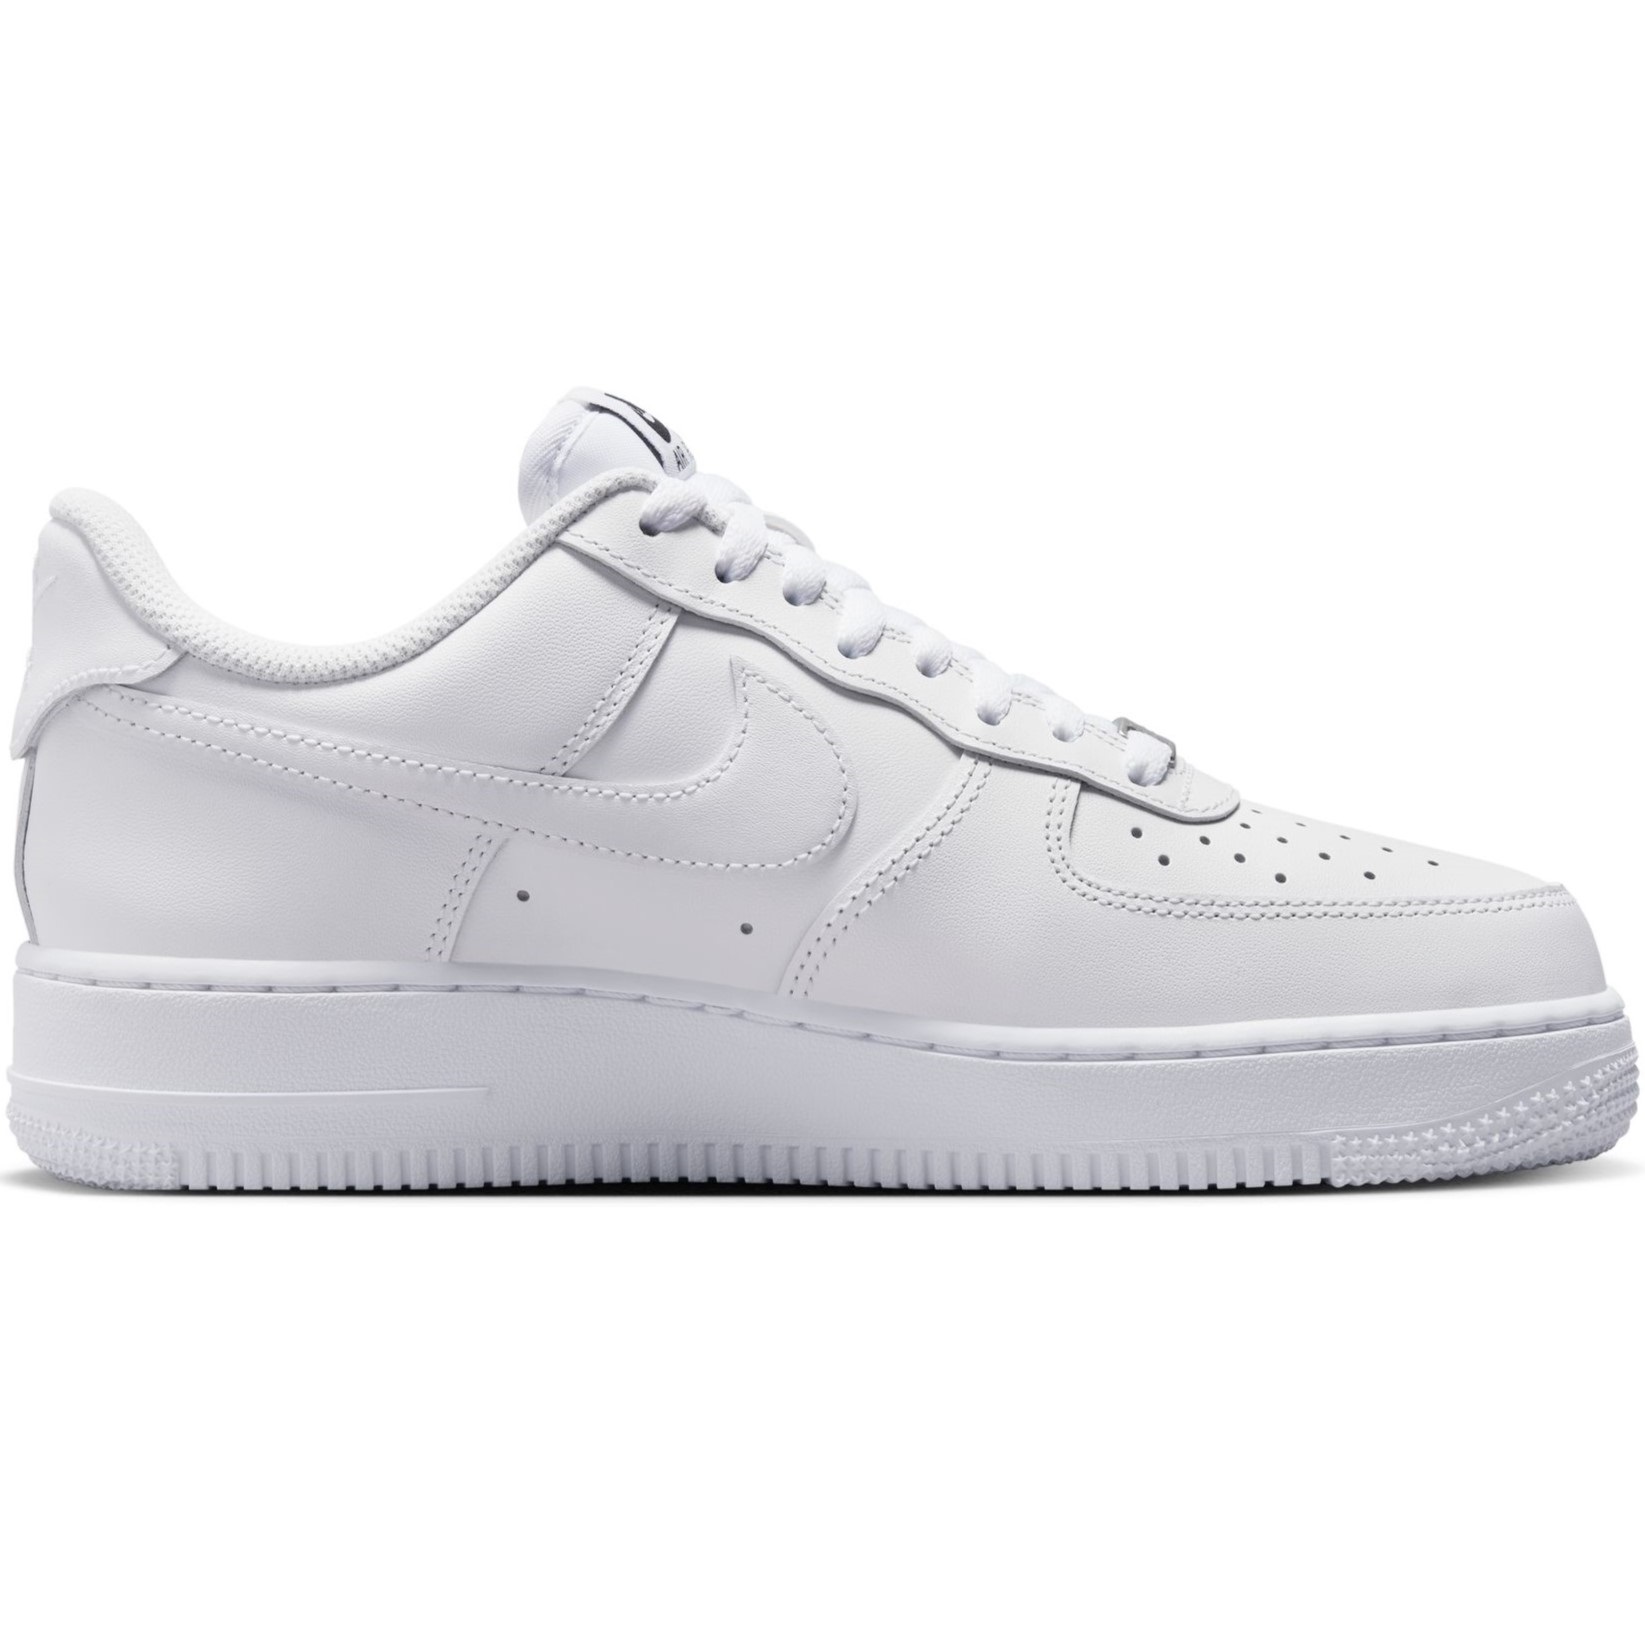 GIÀY THỂ THAO NỮ NIKE AIR FORCE 1 07 EASYON WHITE WOMENS SHOES DX5883-100 4